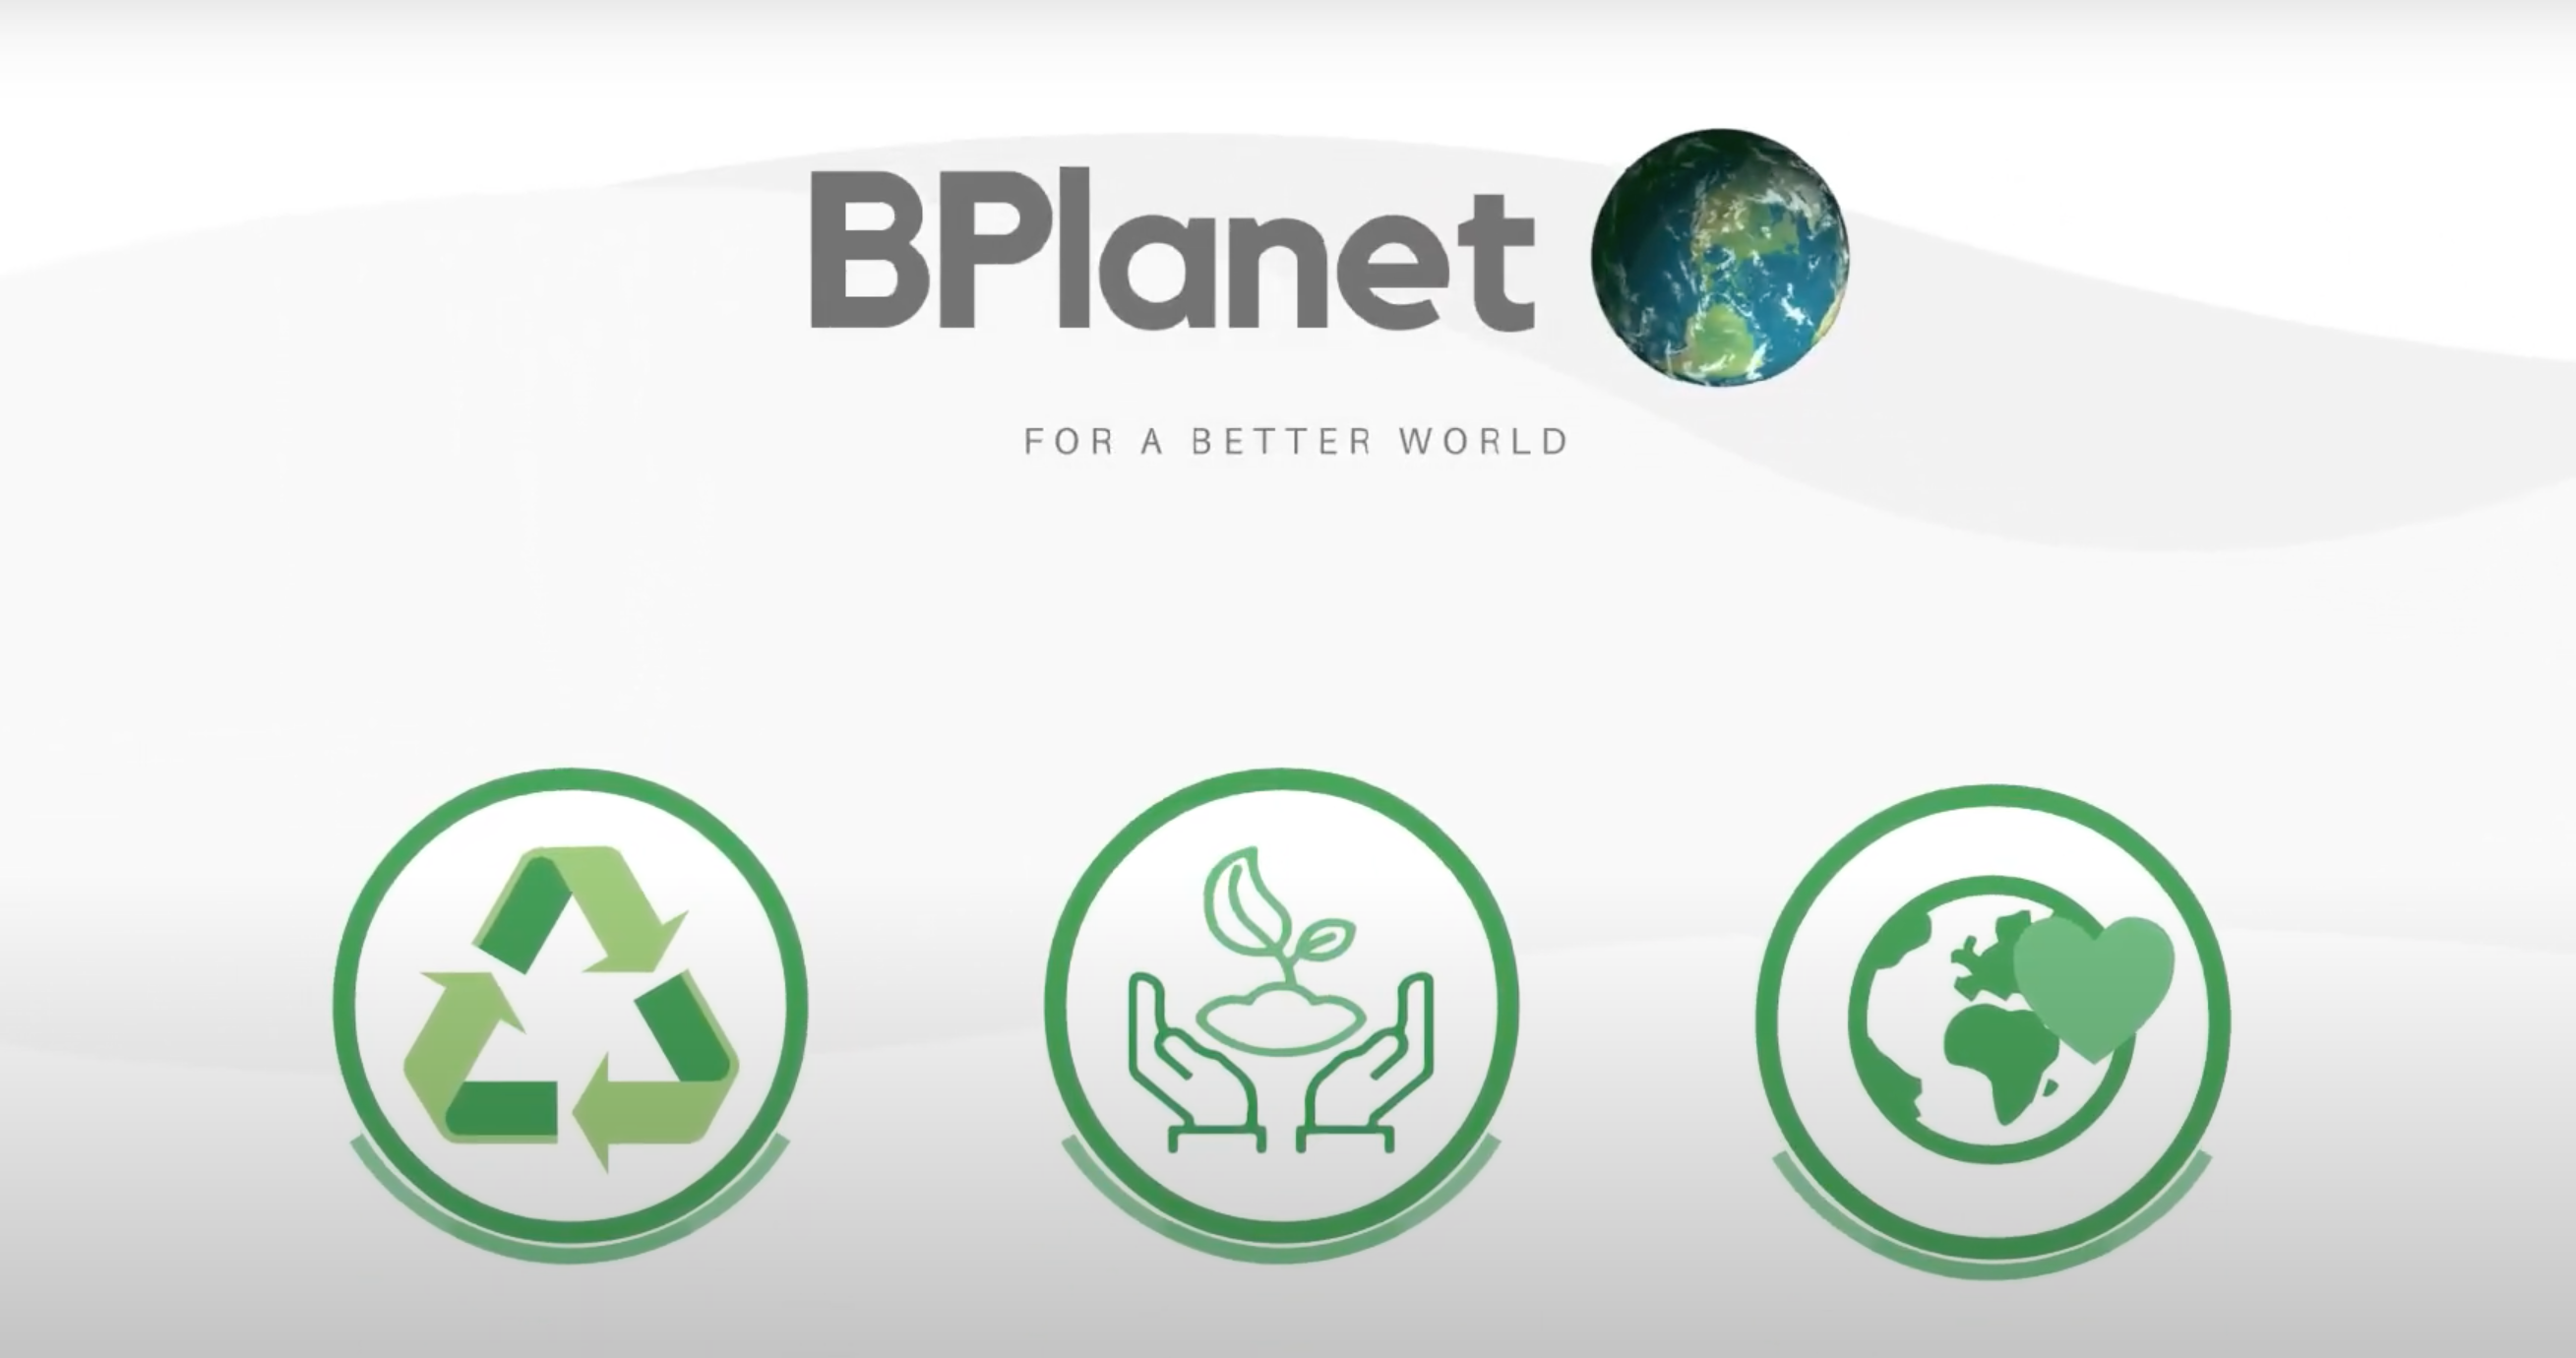 Load video: About Bplanet